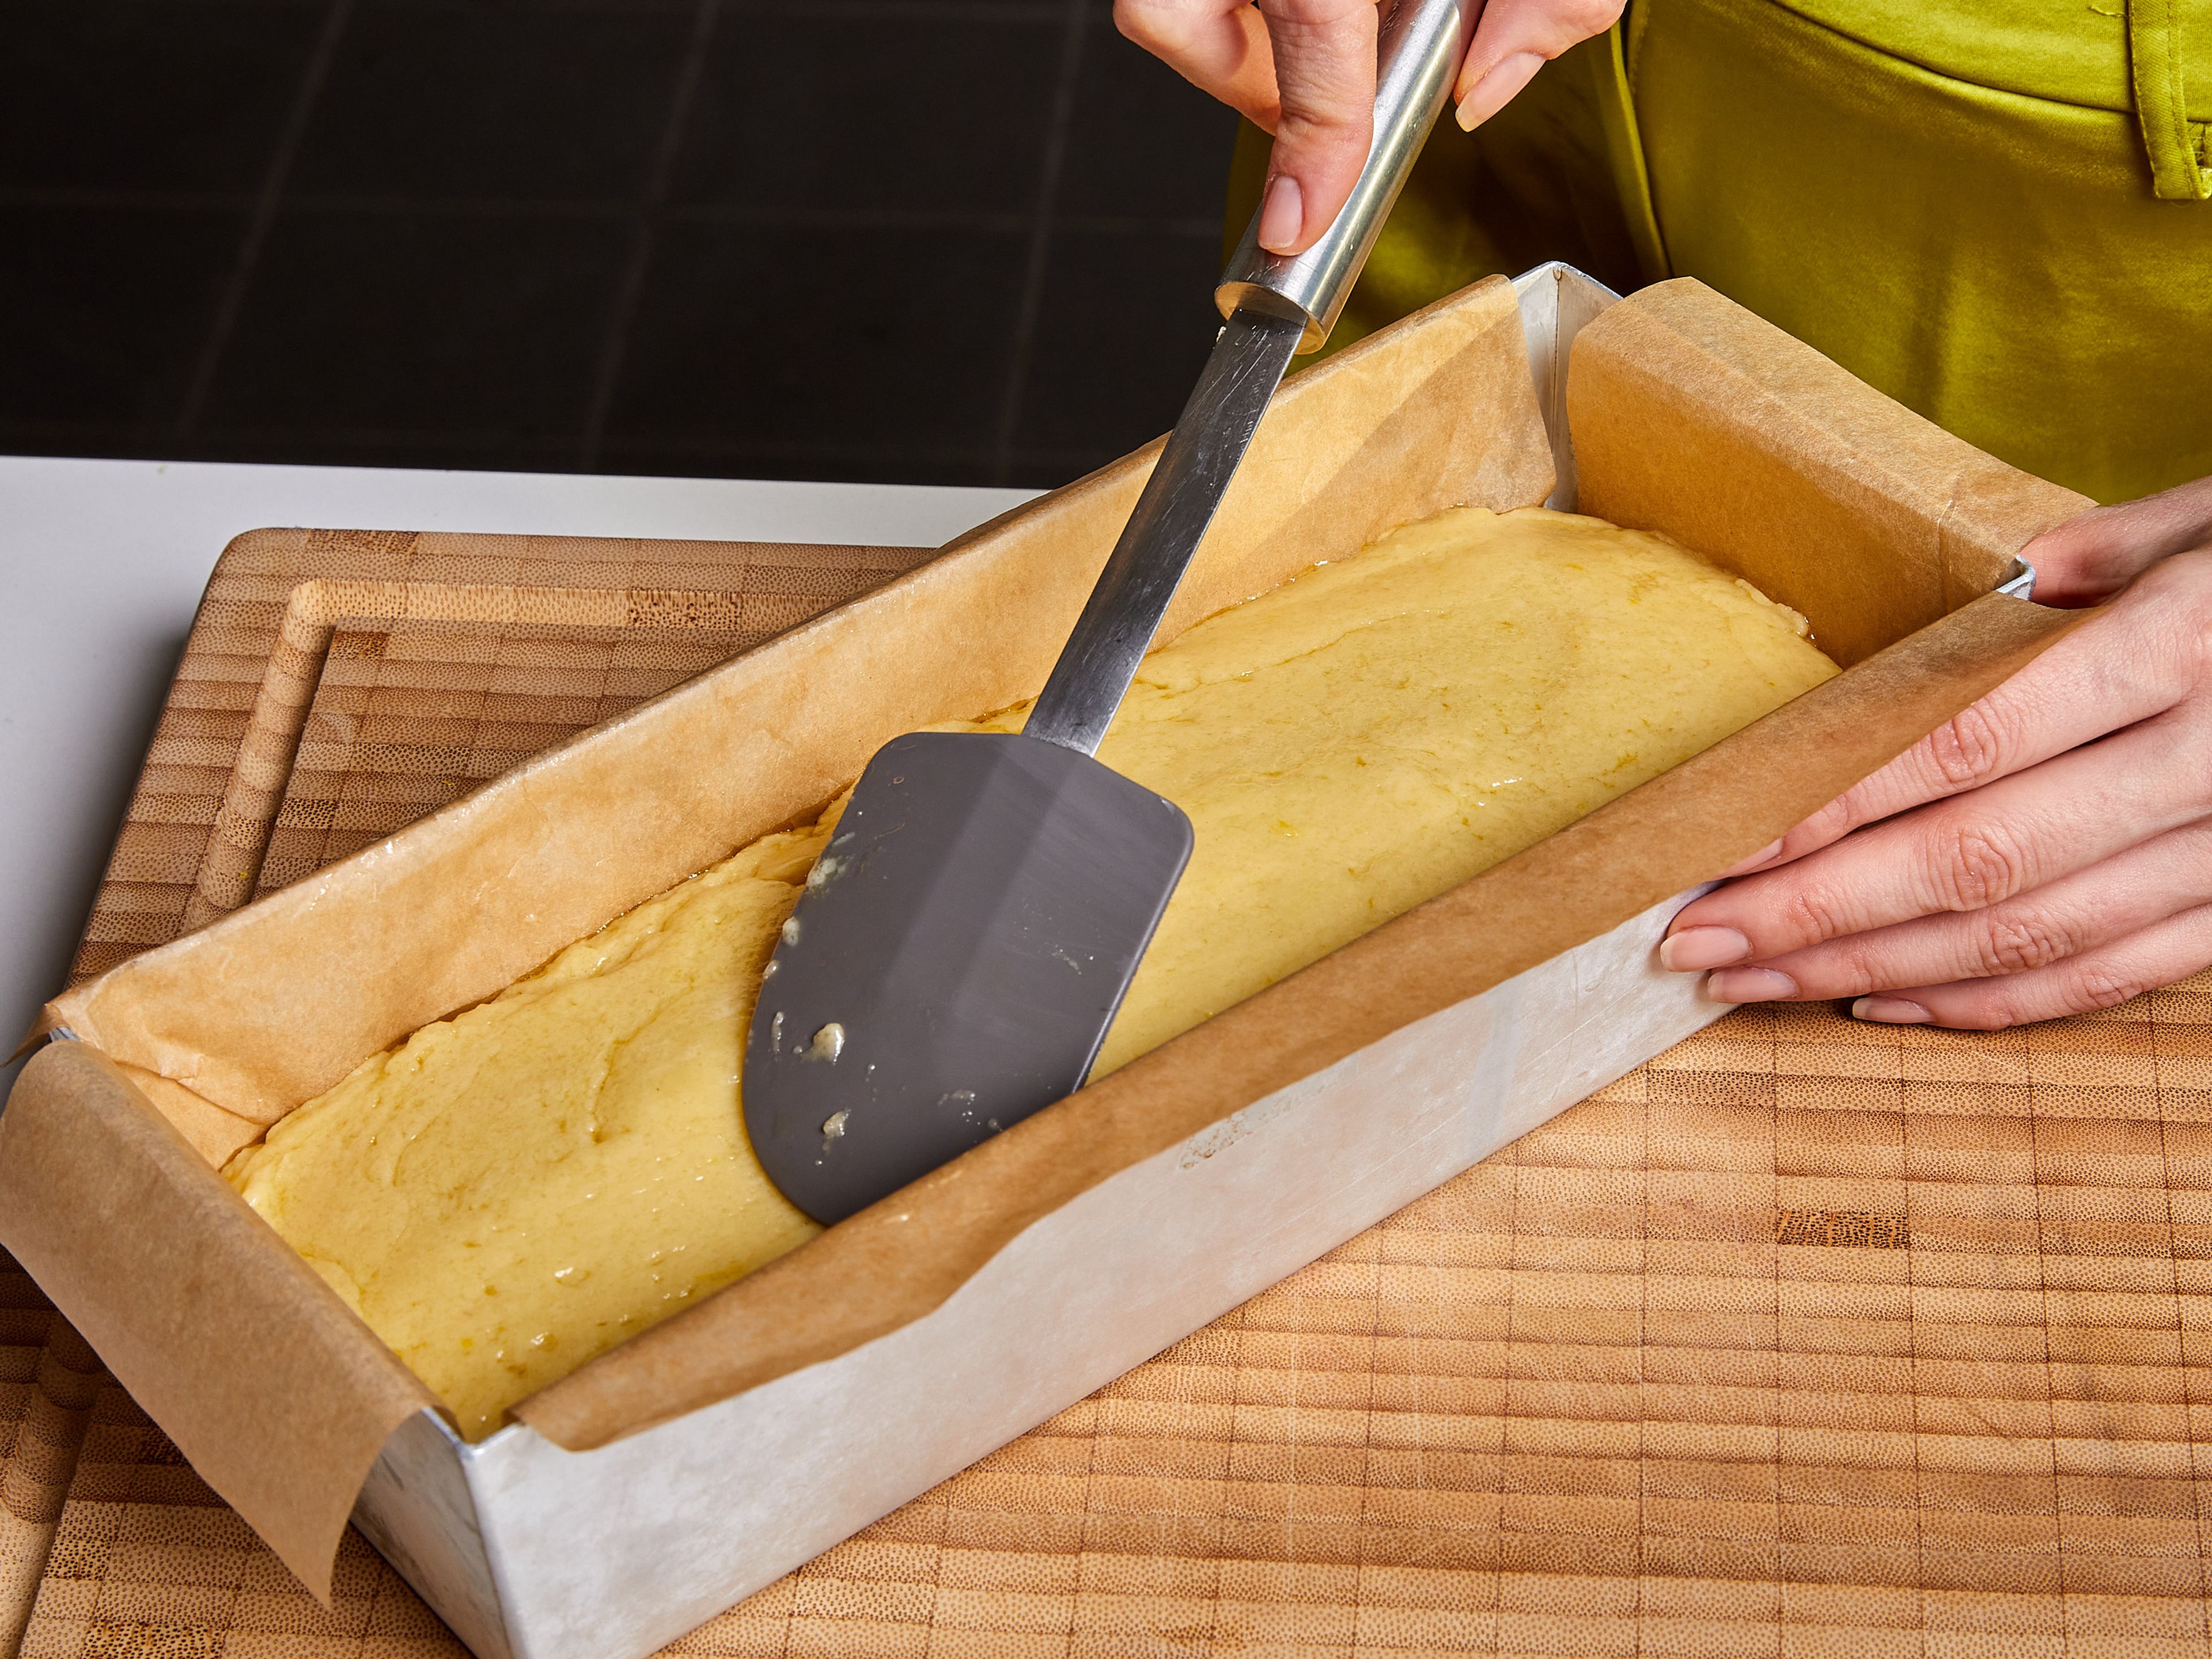 Pour the batter into the loaf tin. Smooth it out if necessary. Transfer it in the preheated oven and bake the cake for approx. 50–55 min. If a skewer or fork pokes through without wet batter, the cake is ready.